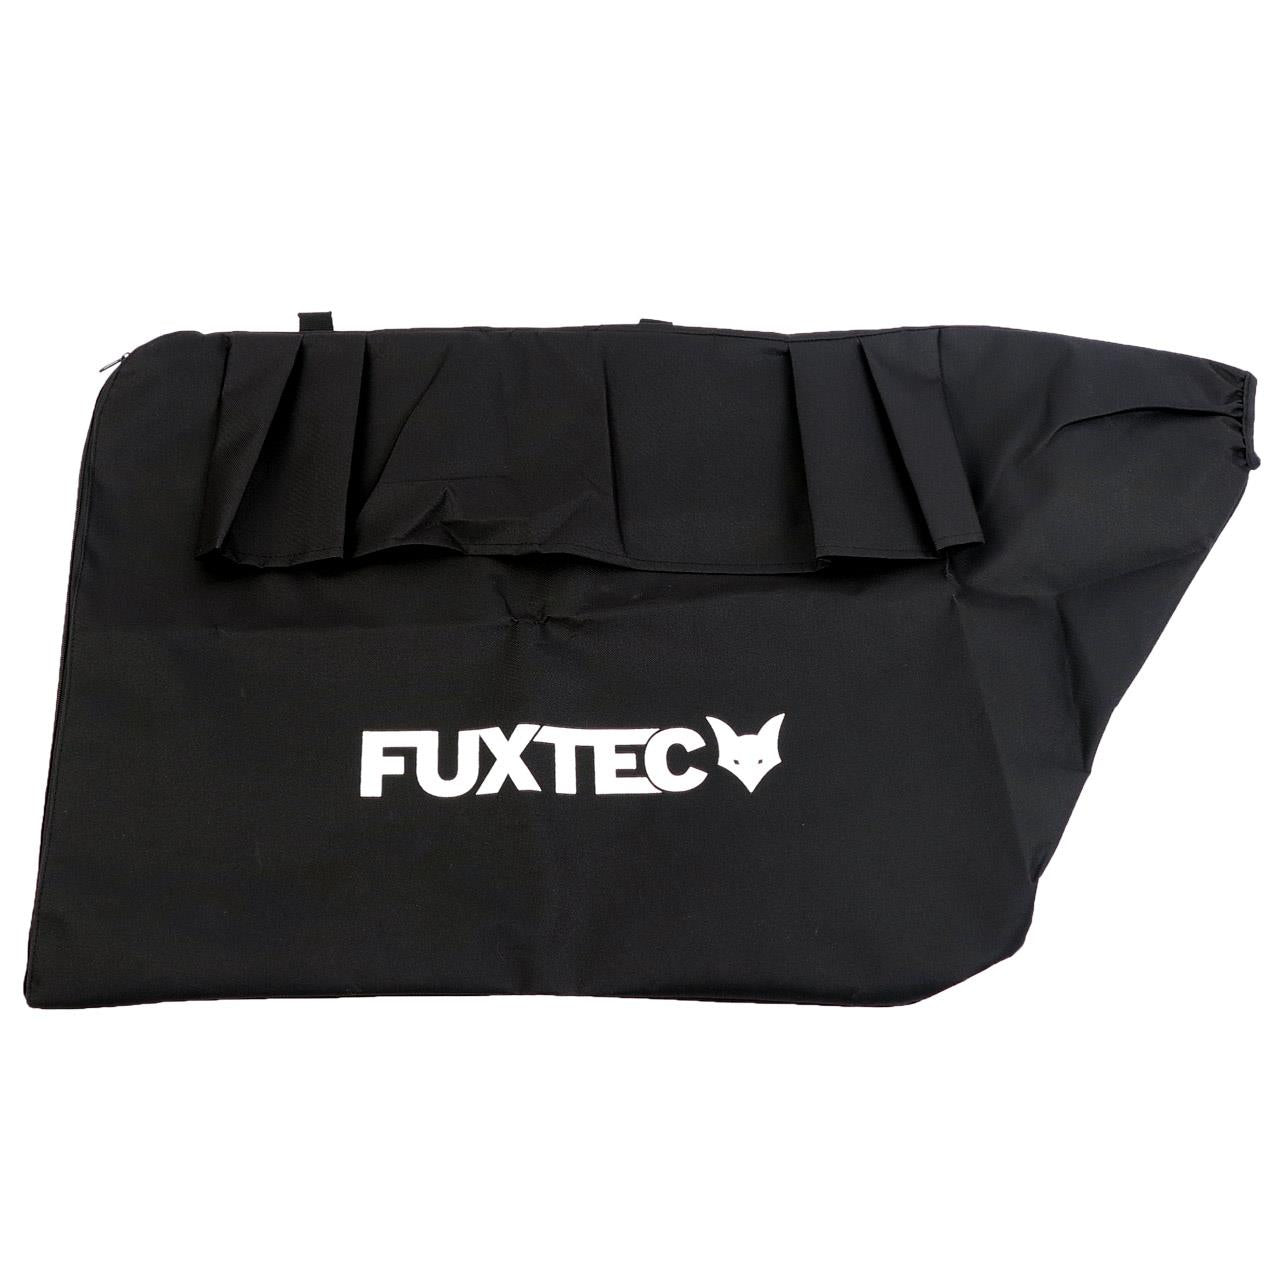 FUXTEC leaf collection bag suitable for professional leaf blower LBS126P